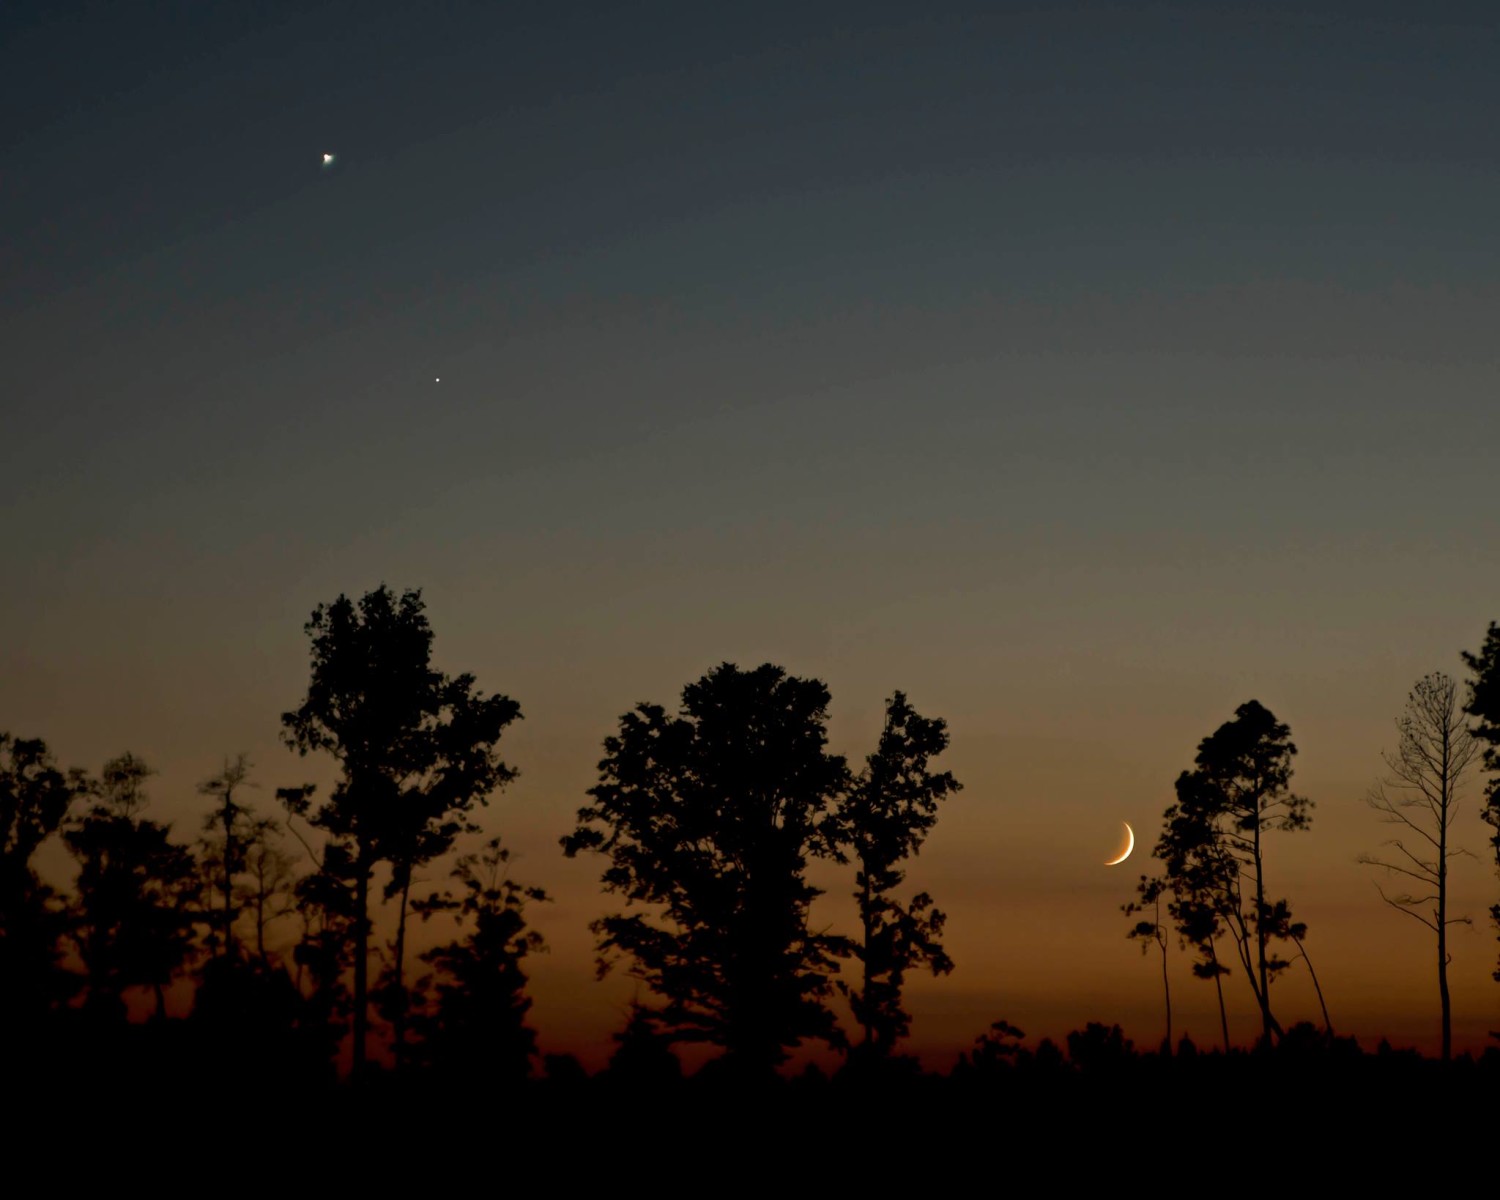 View larger. | Moon and Venus on September 7, as captured by EarthSky Facebook friend Ken Christison in North Carolina.  Thank you, Ken!  On Sunday evening - September 8 - the moon will appear much closer to Venus.  The Americas, in particular, will get a dramatically close view of the pair.